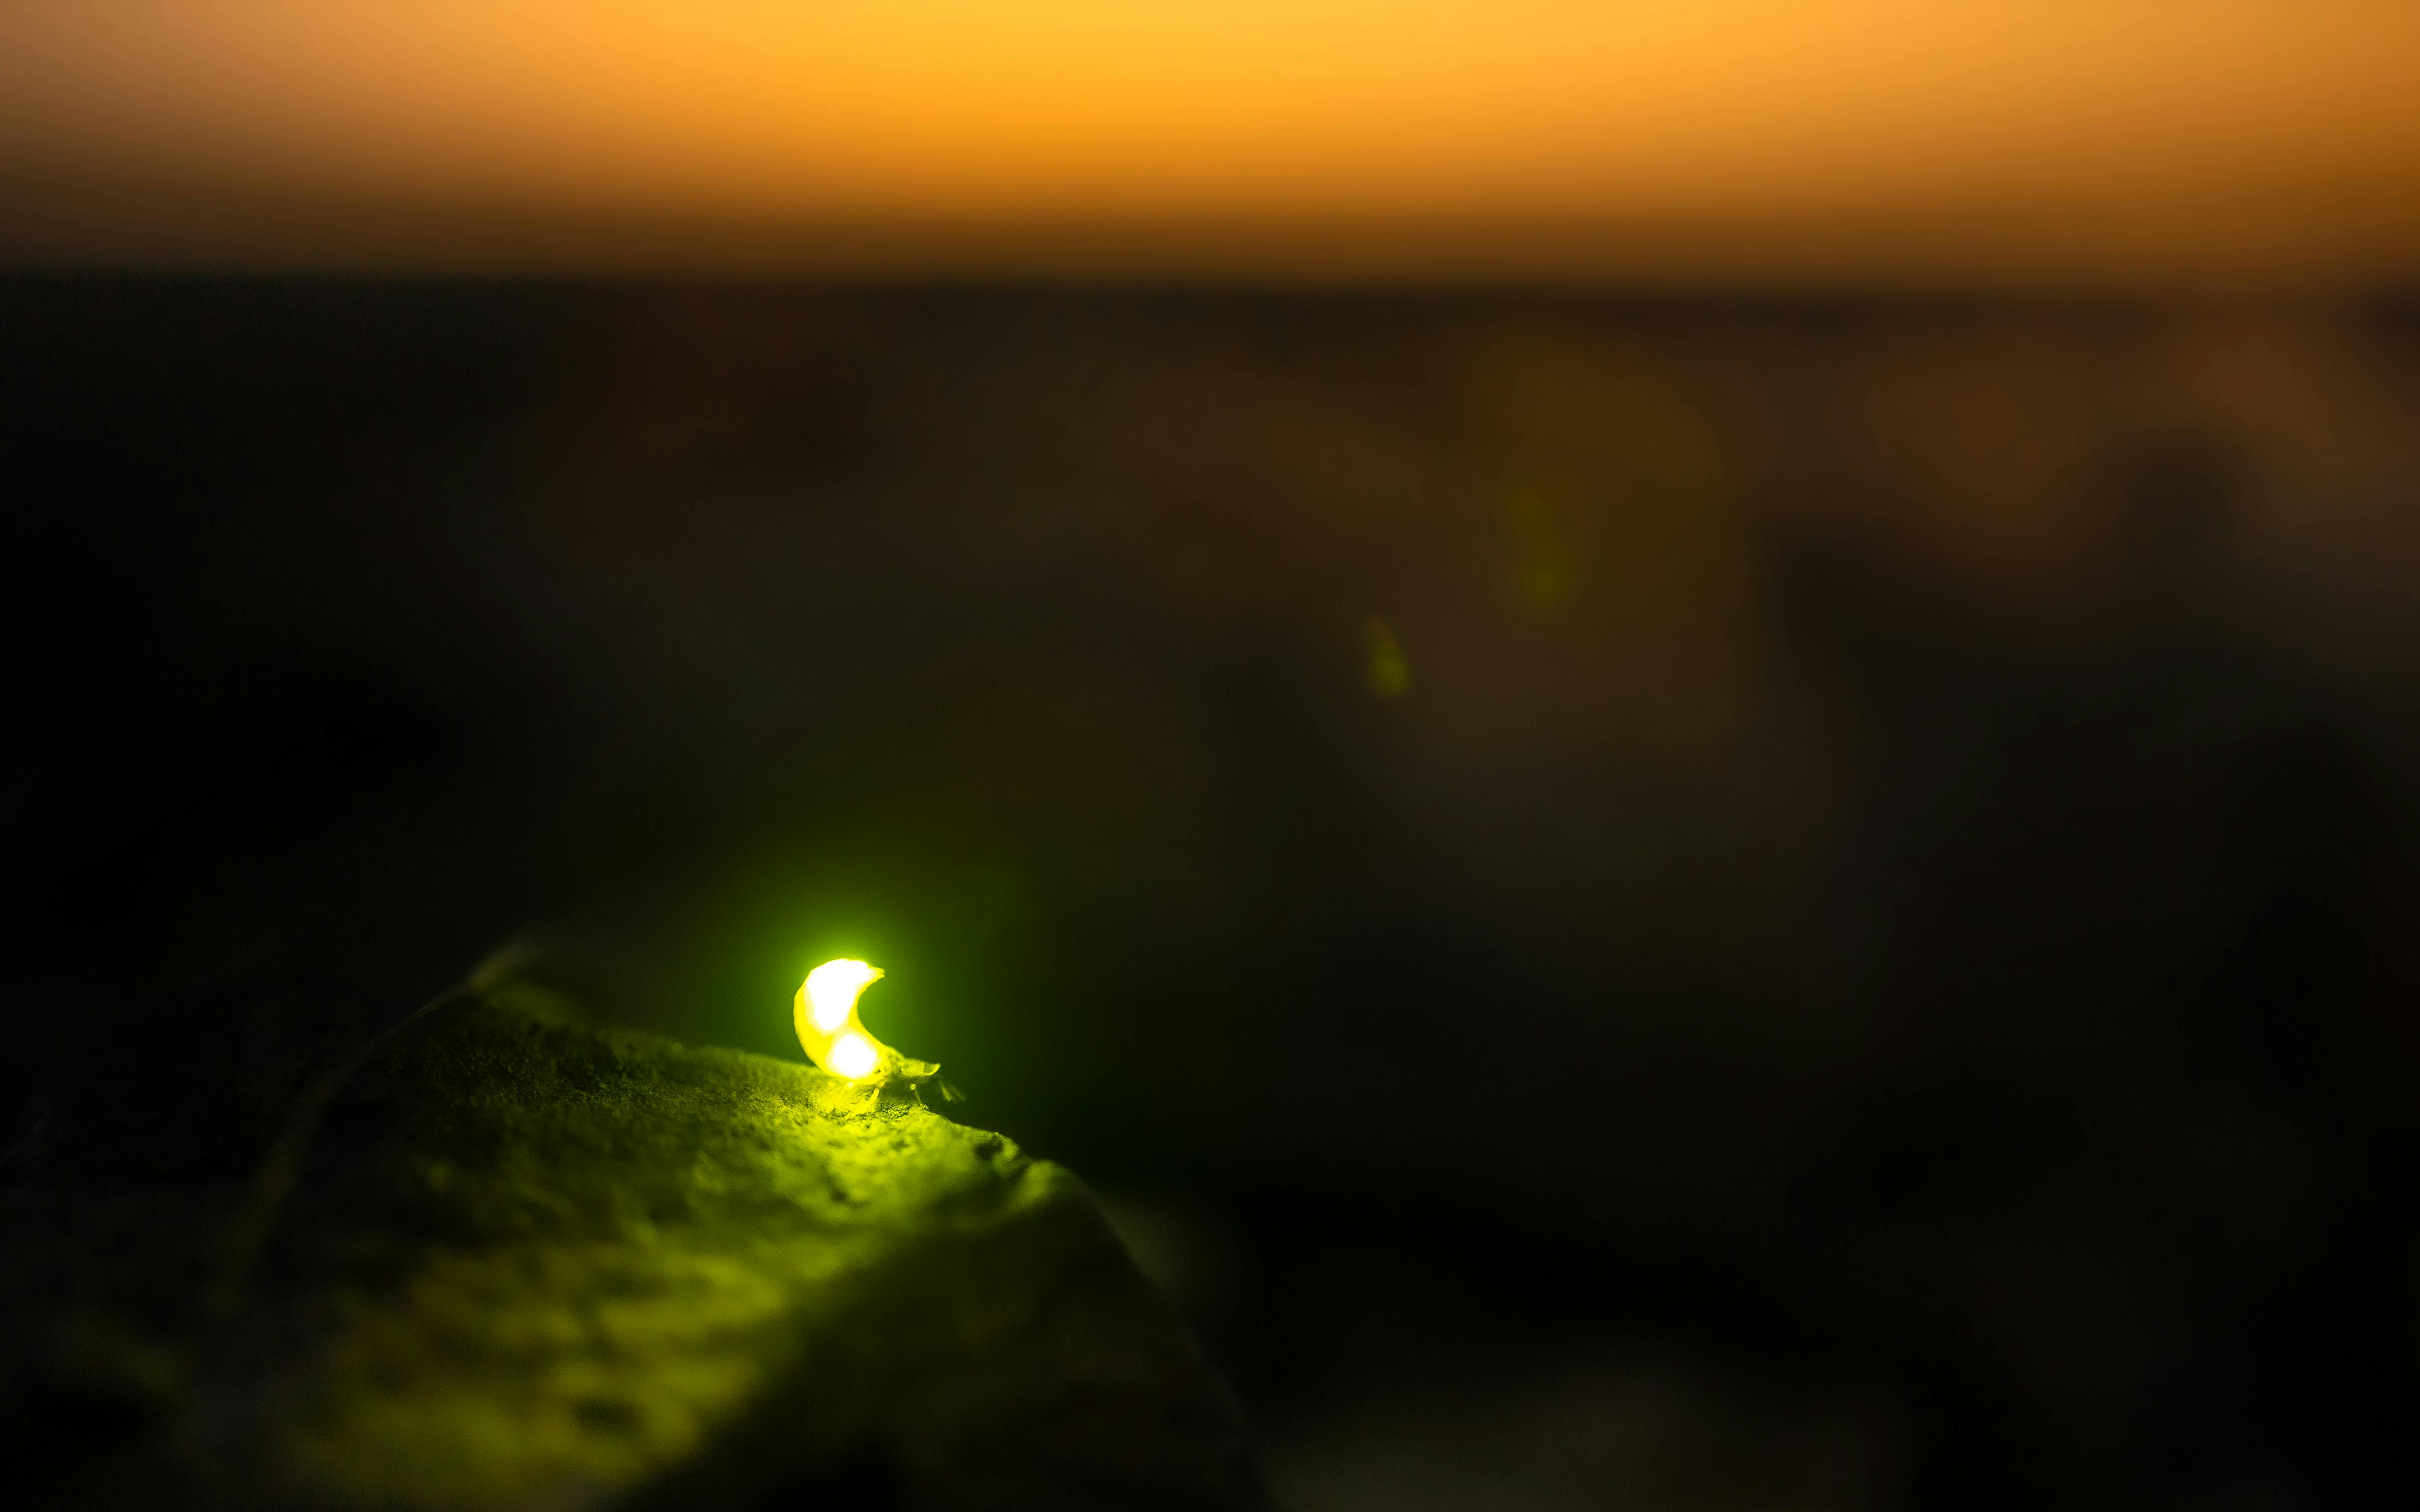 This desktop wallpaper showcases a macro shot of a firefly in flight